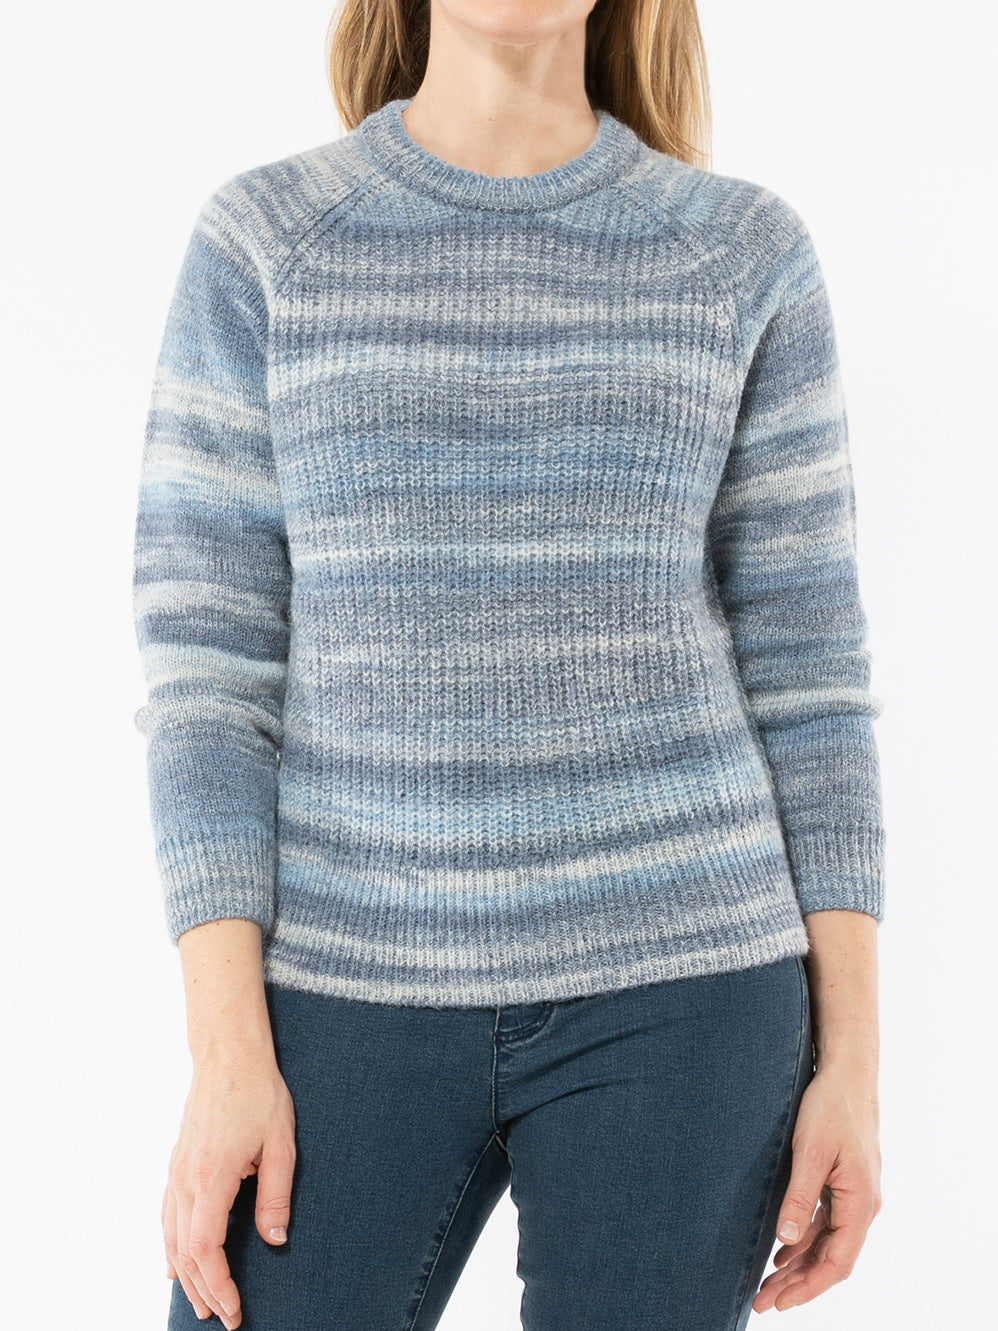 JUMP SPACE DYE PULLOVER